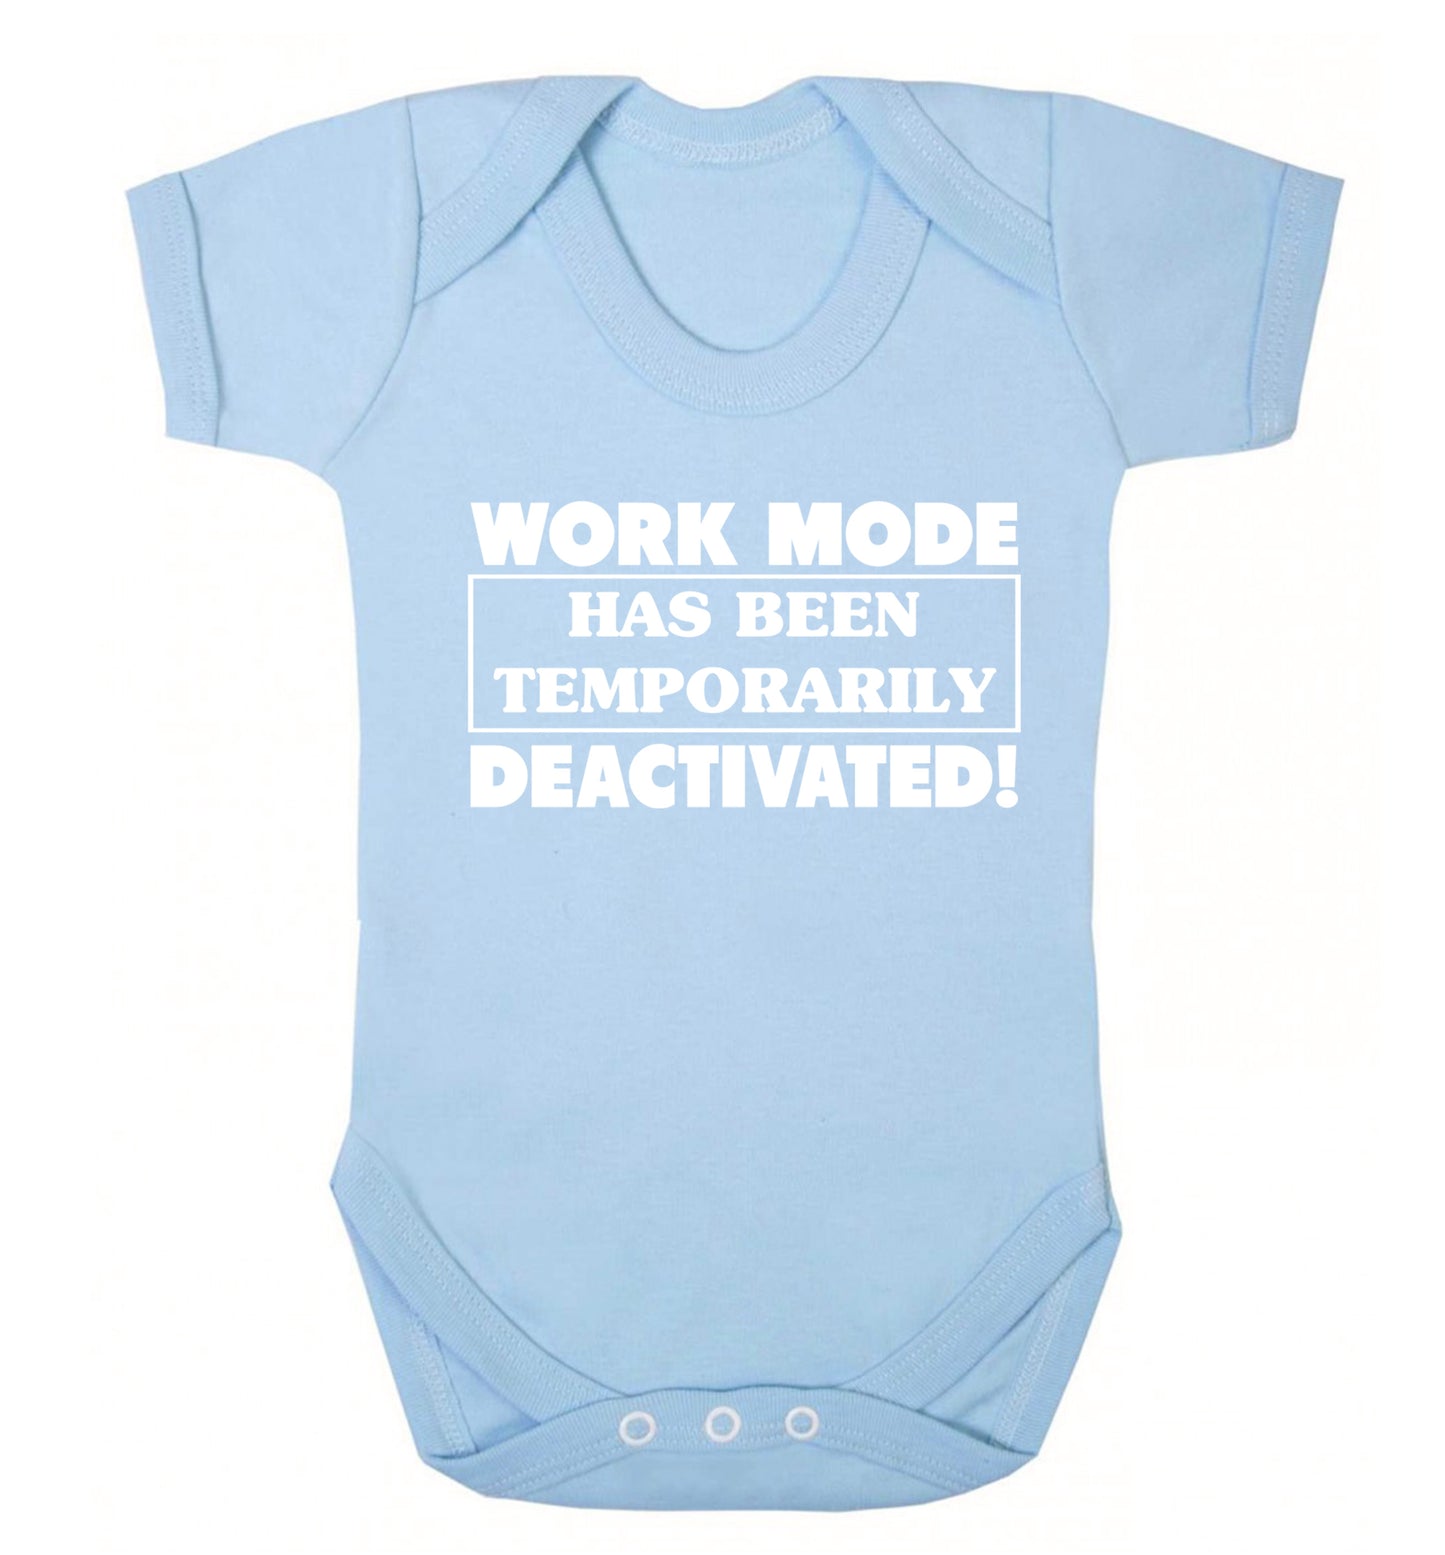 Work mode has now been temporarily deactivated Baby Vest pale blue 18-24 months